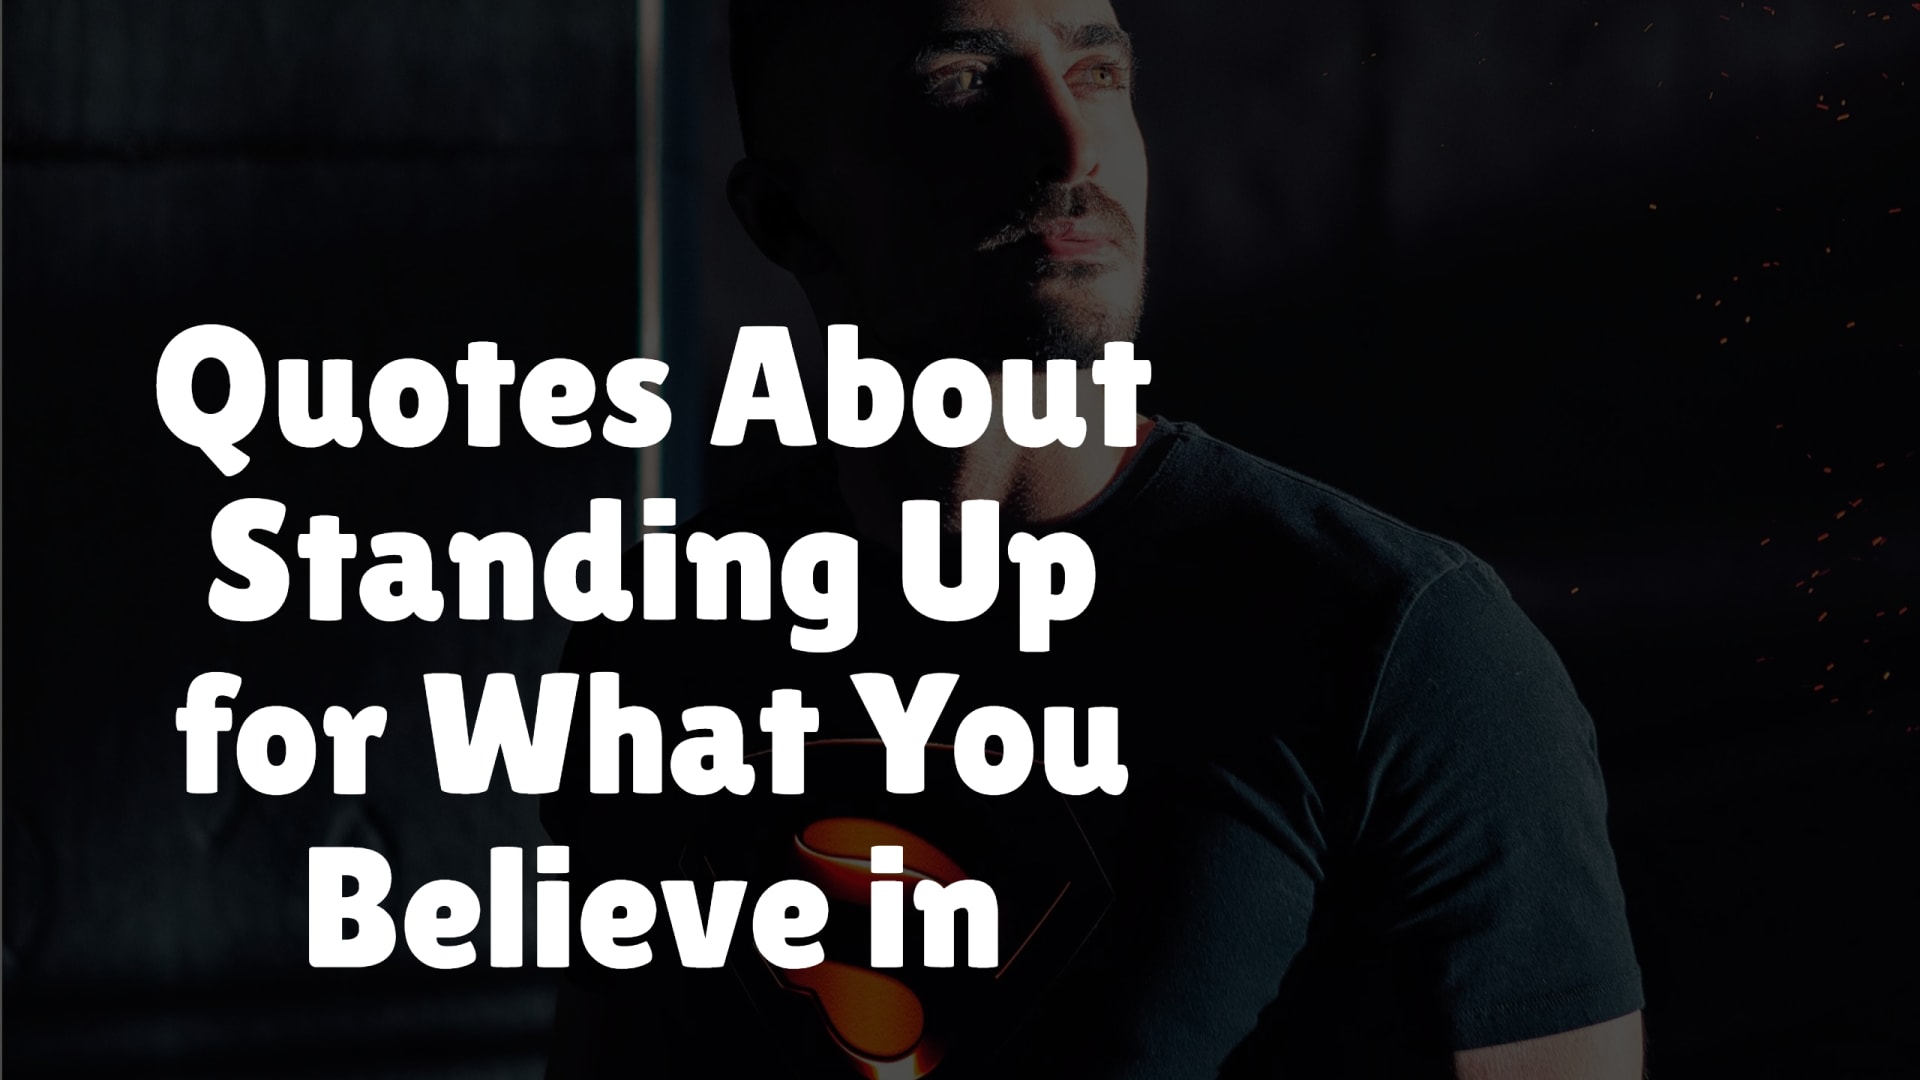 Quotes About Standing Up for What You Believe in